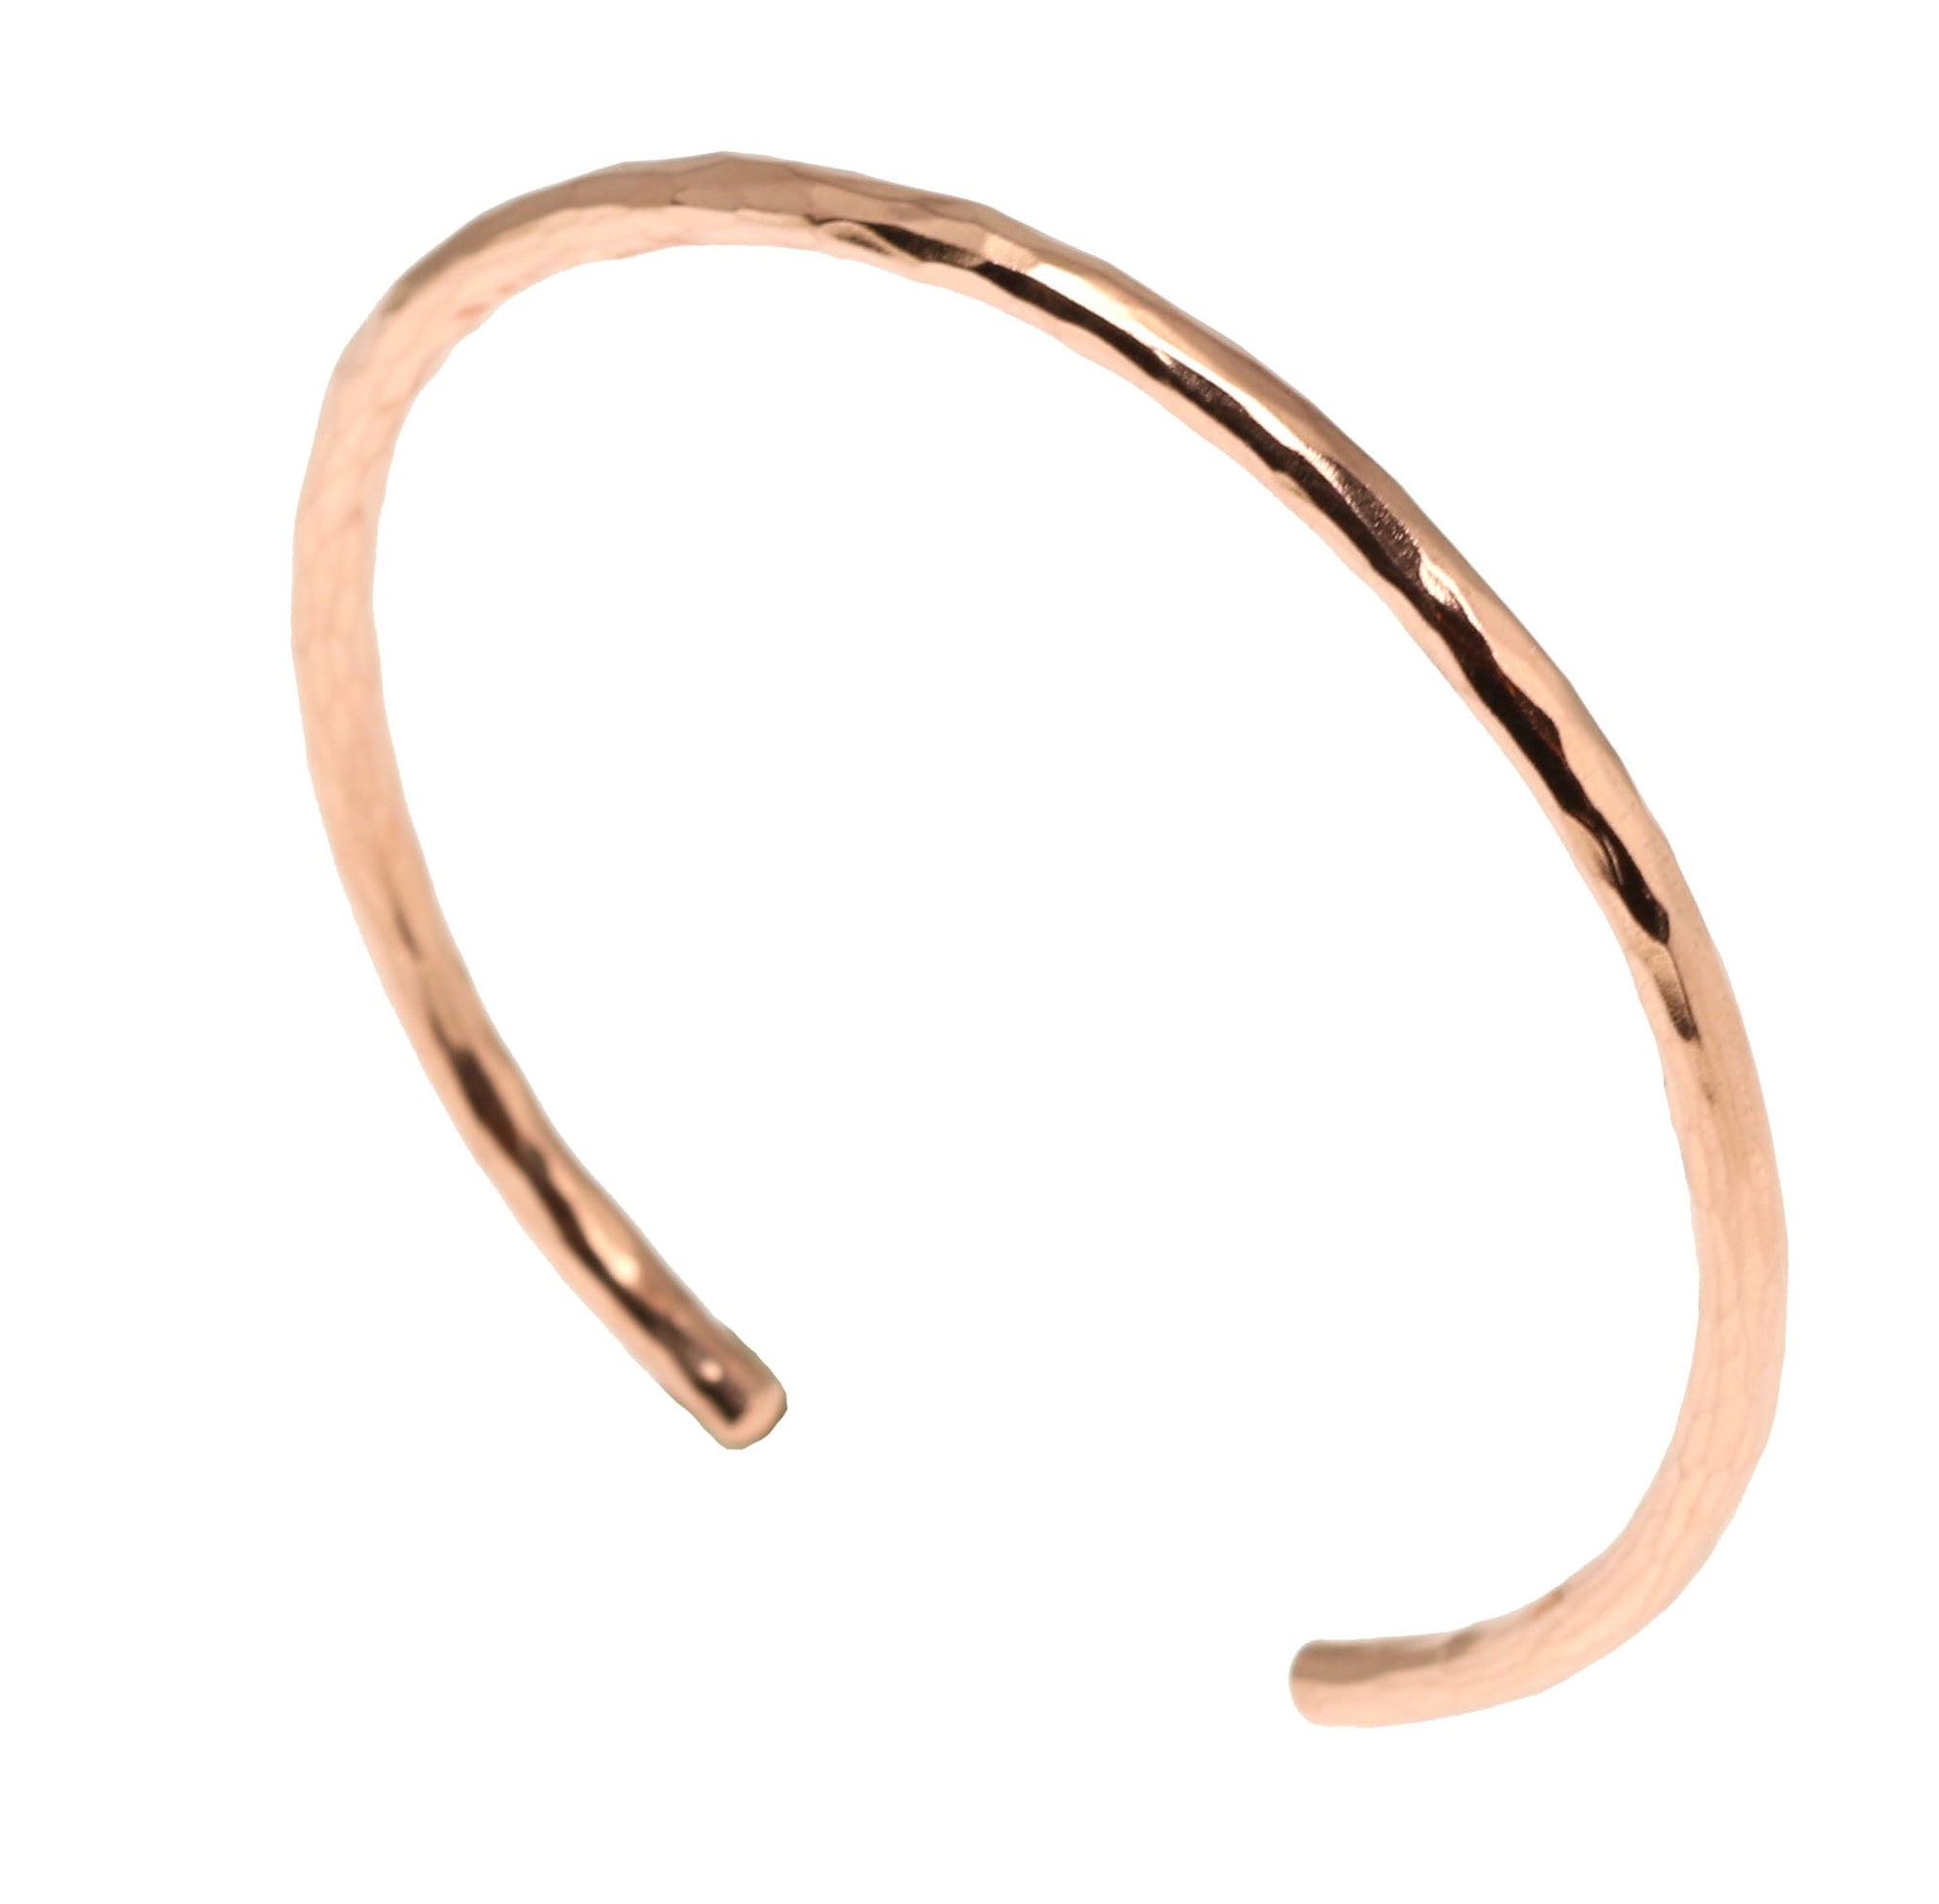 3mm Wide Hammered Copper Cuff Bracelet Right Side View